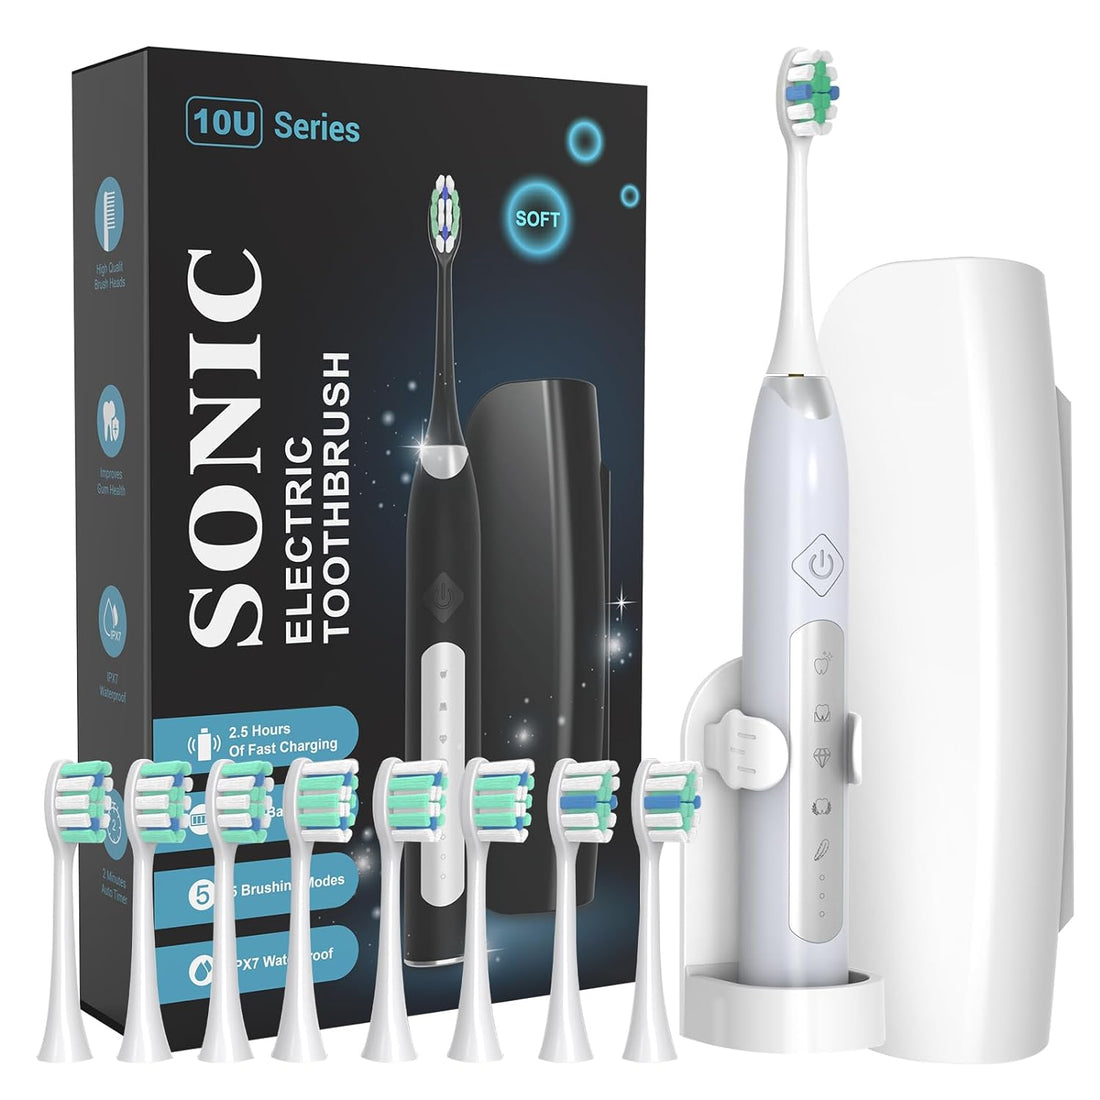 Sonic Electric Toothbrushes for Adults, 8 Brush Heads Electric Toothbrush Deep Clean 5 Modes, Rechargeable Travel Toothbrushes Fast Charge with 2 Minutes Smart Timer (Grey)